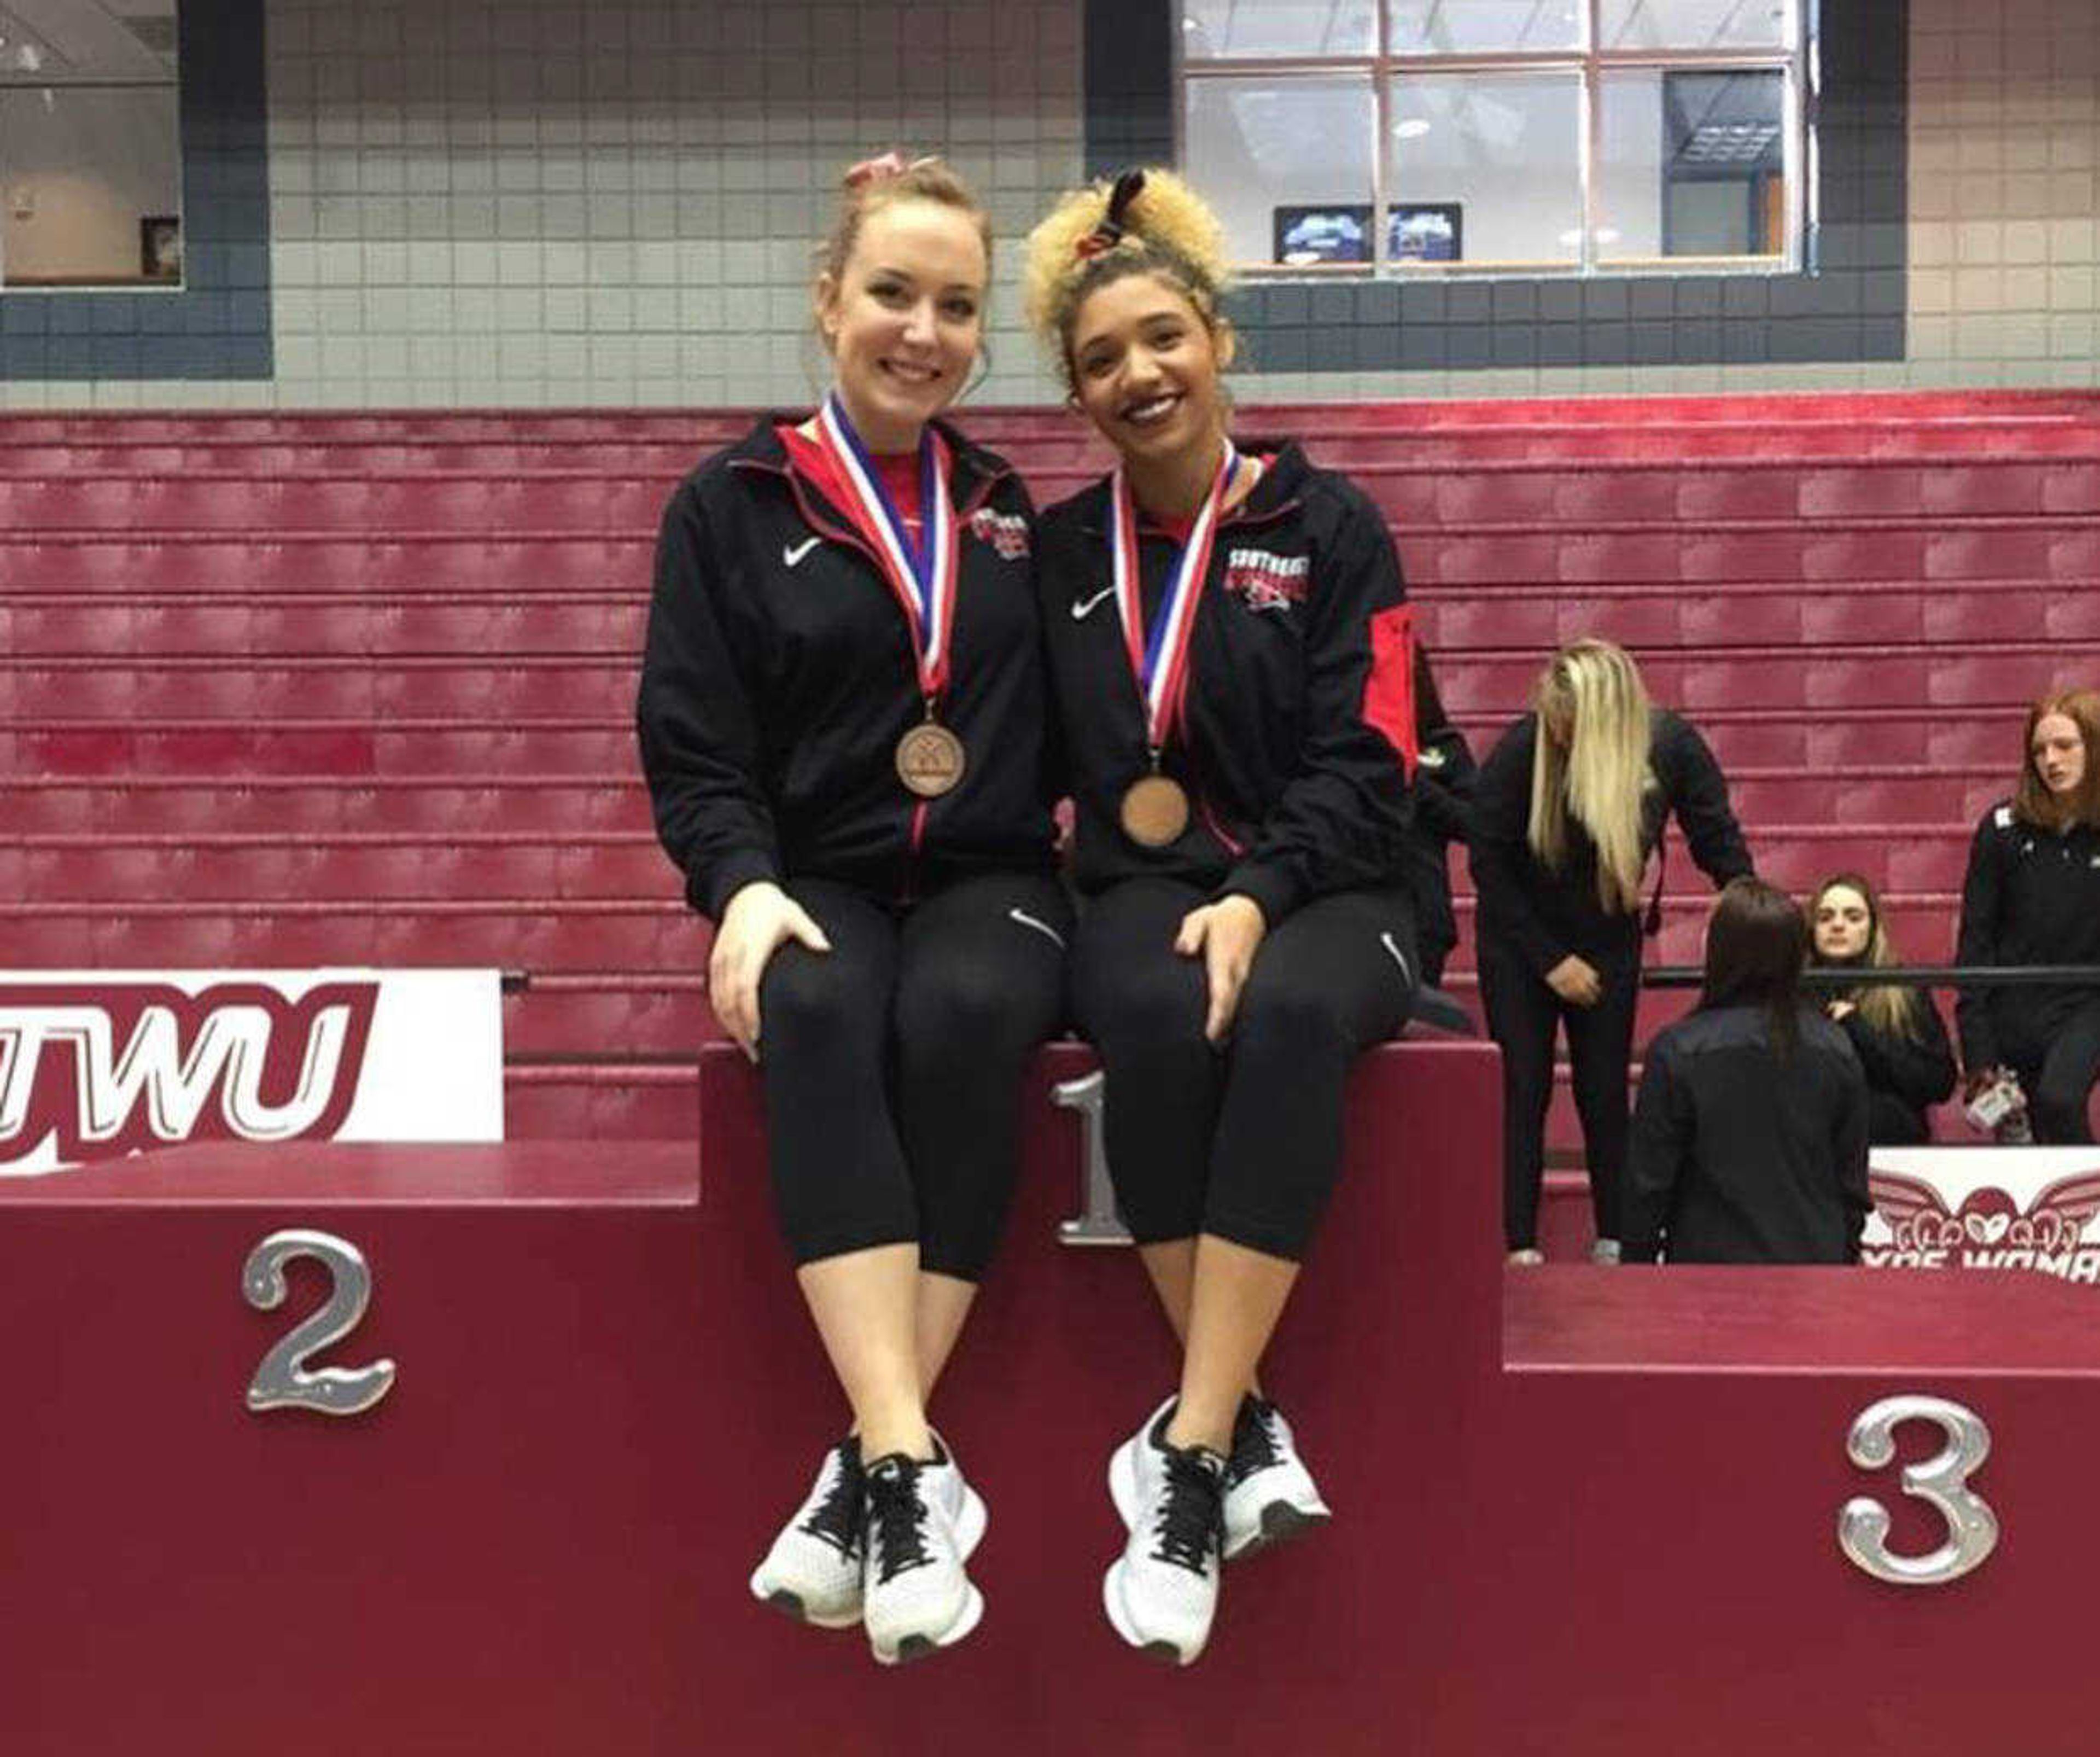 Southeast gymnast Mckinzie Jones and Alexis Brawner pose for a quick photo after competing Sunday at the 2018 USA Gymnastics Women's Collegiate National Championships individual event finals.